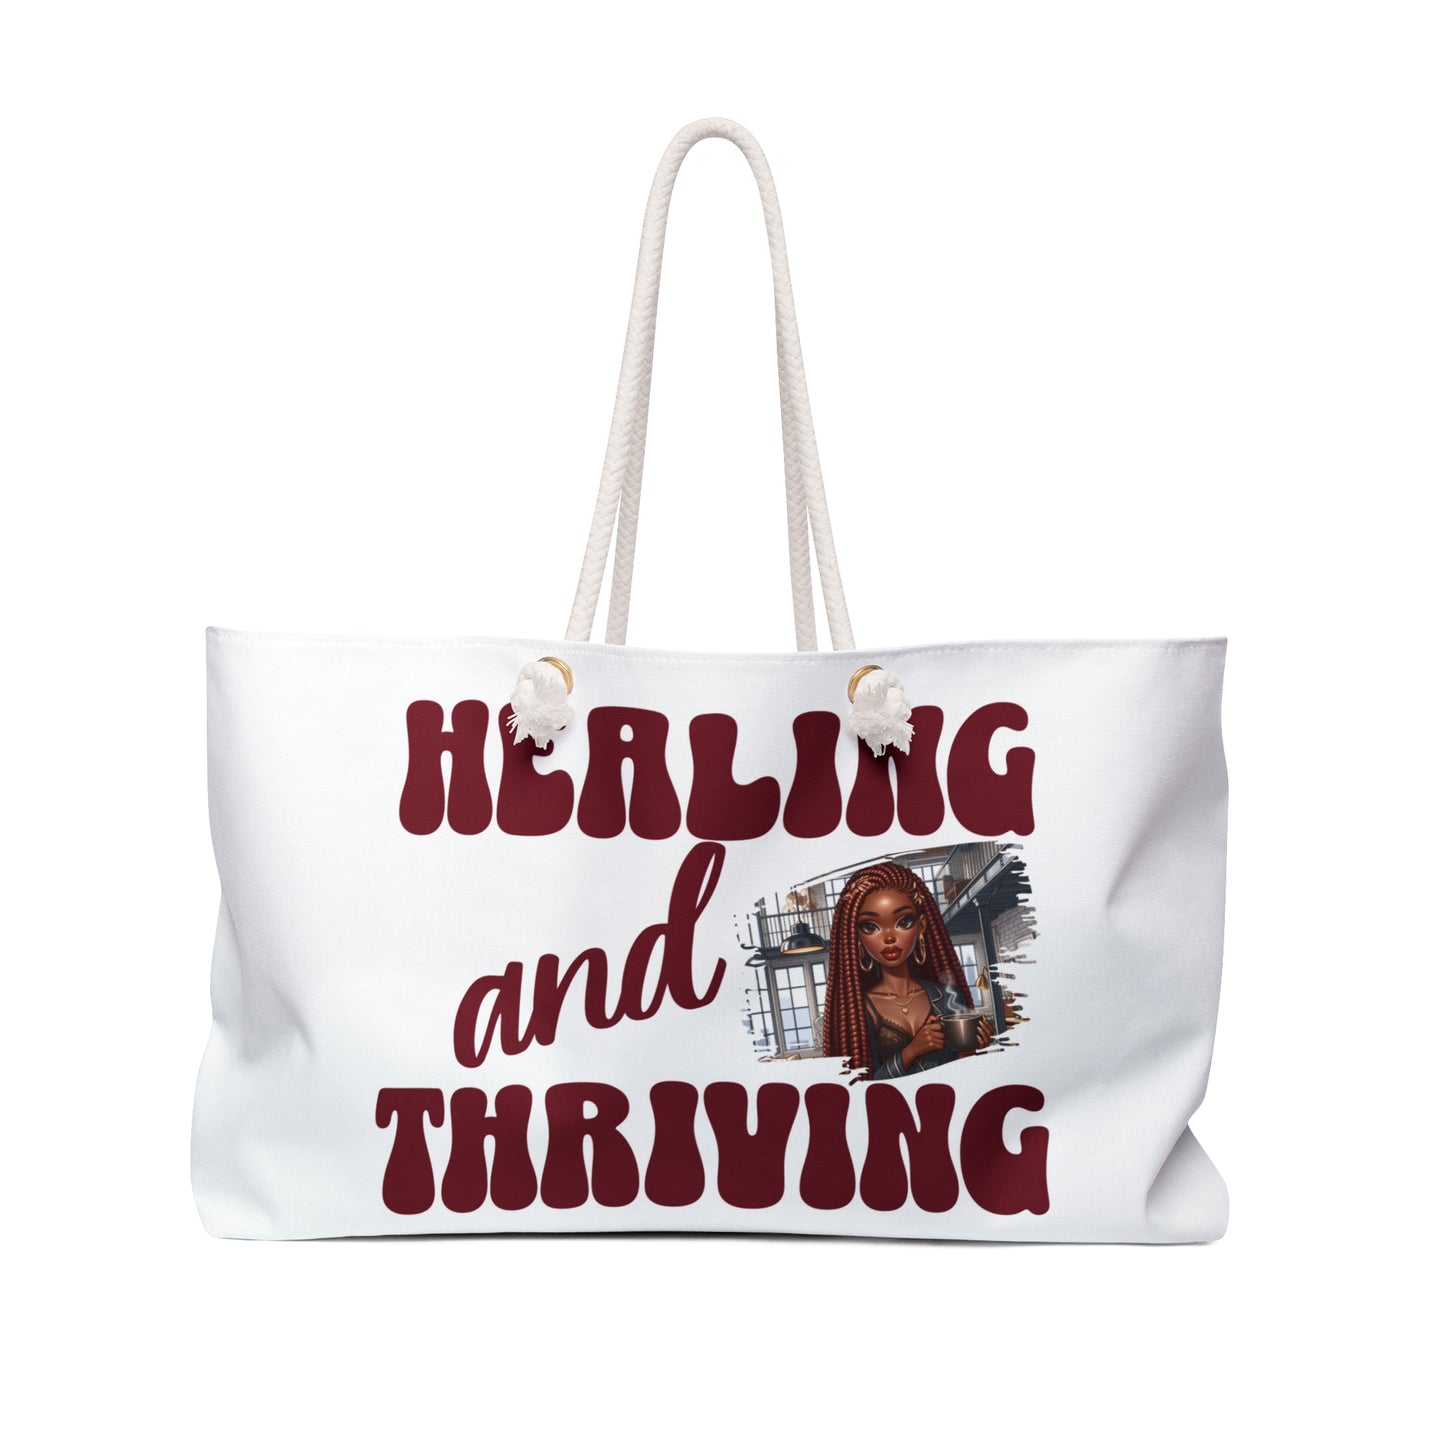 Healing & Thriving: Oversized Weekender Tote (Red on White)